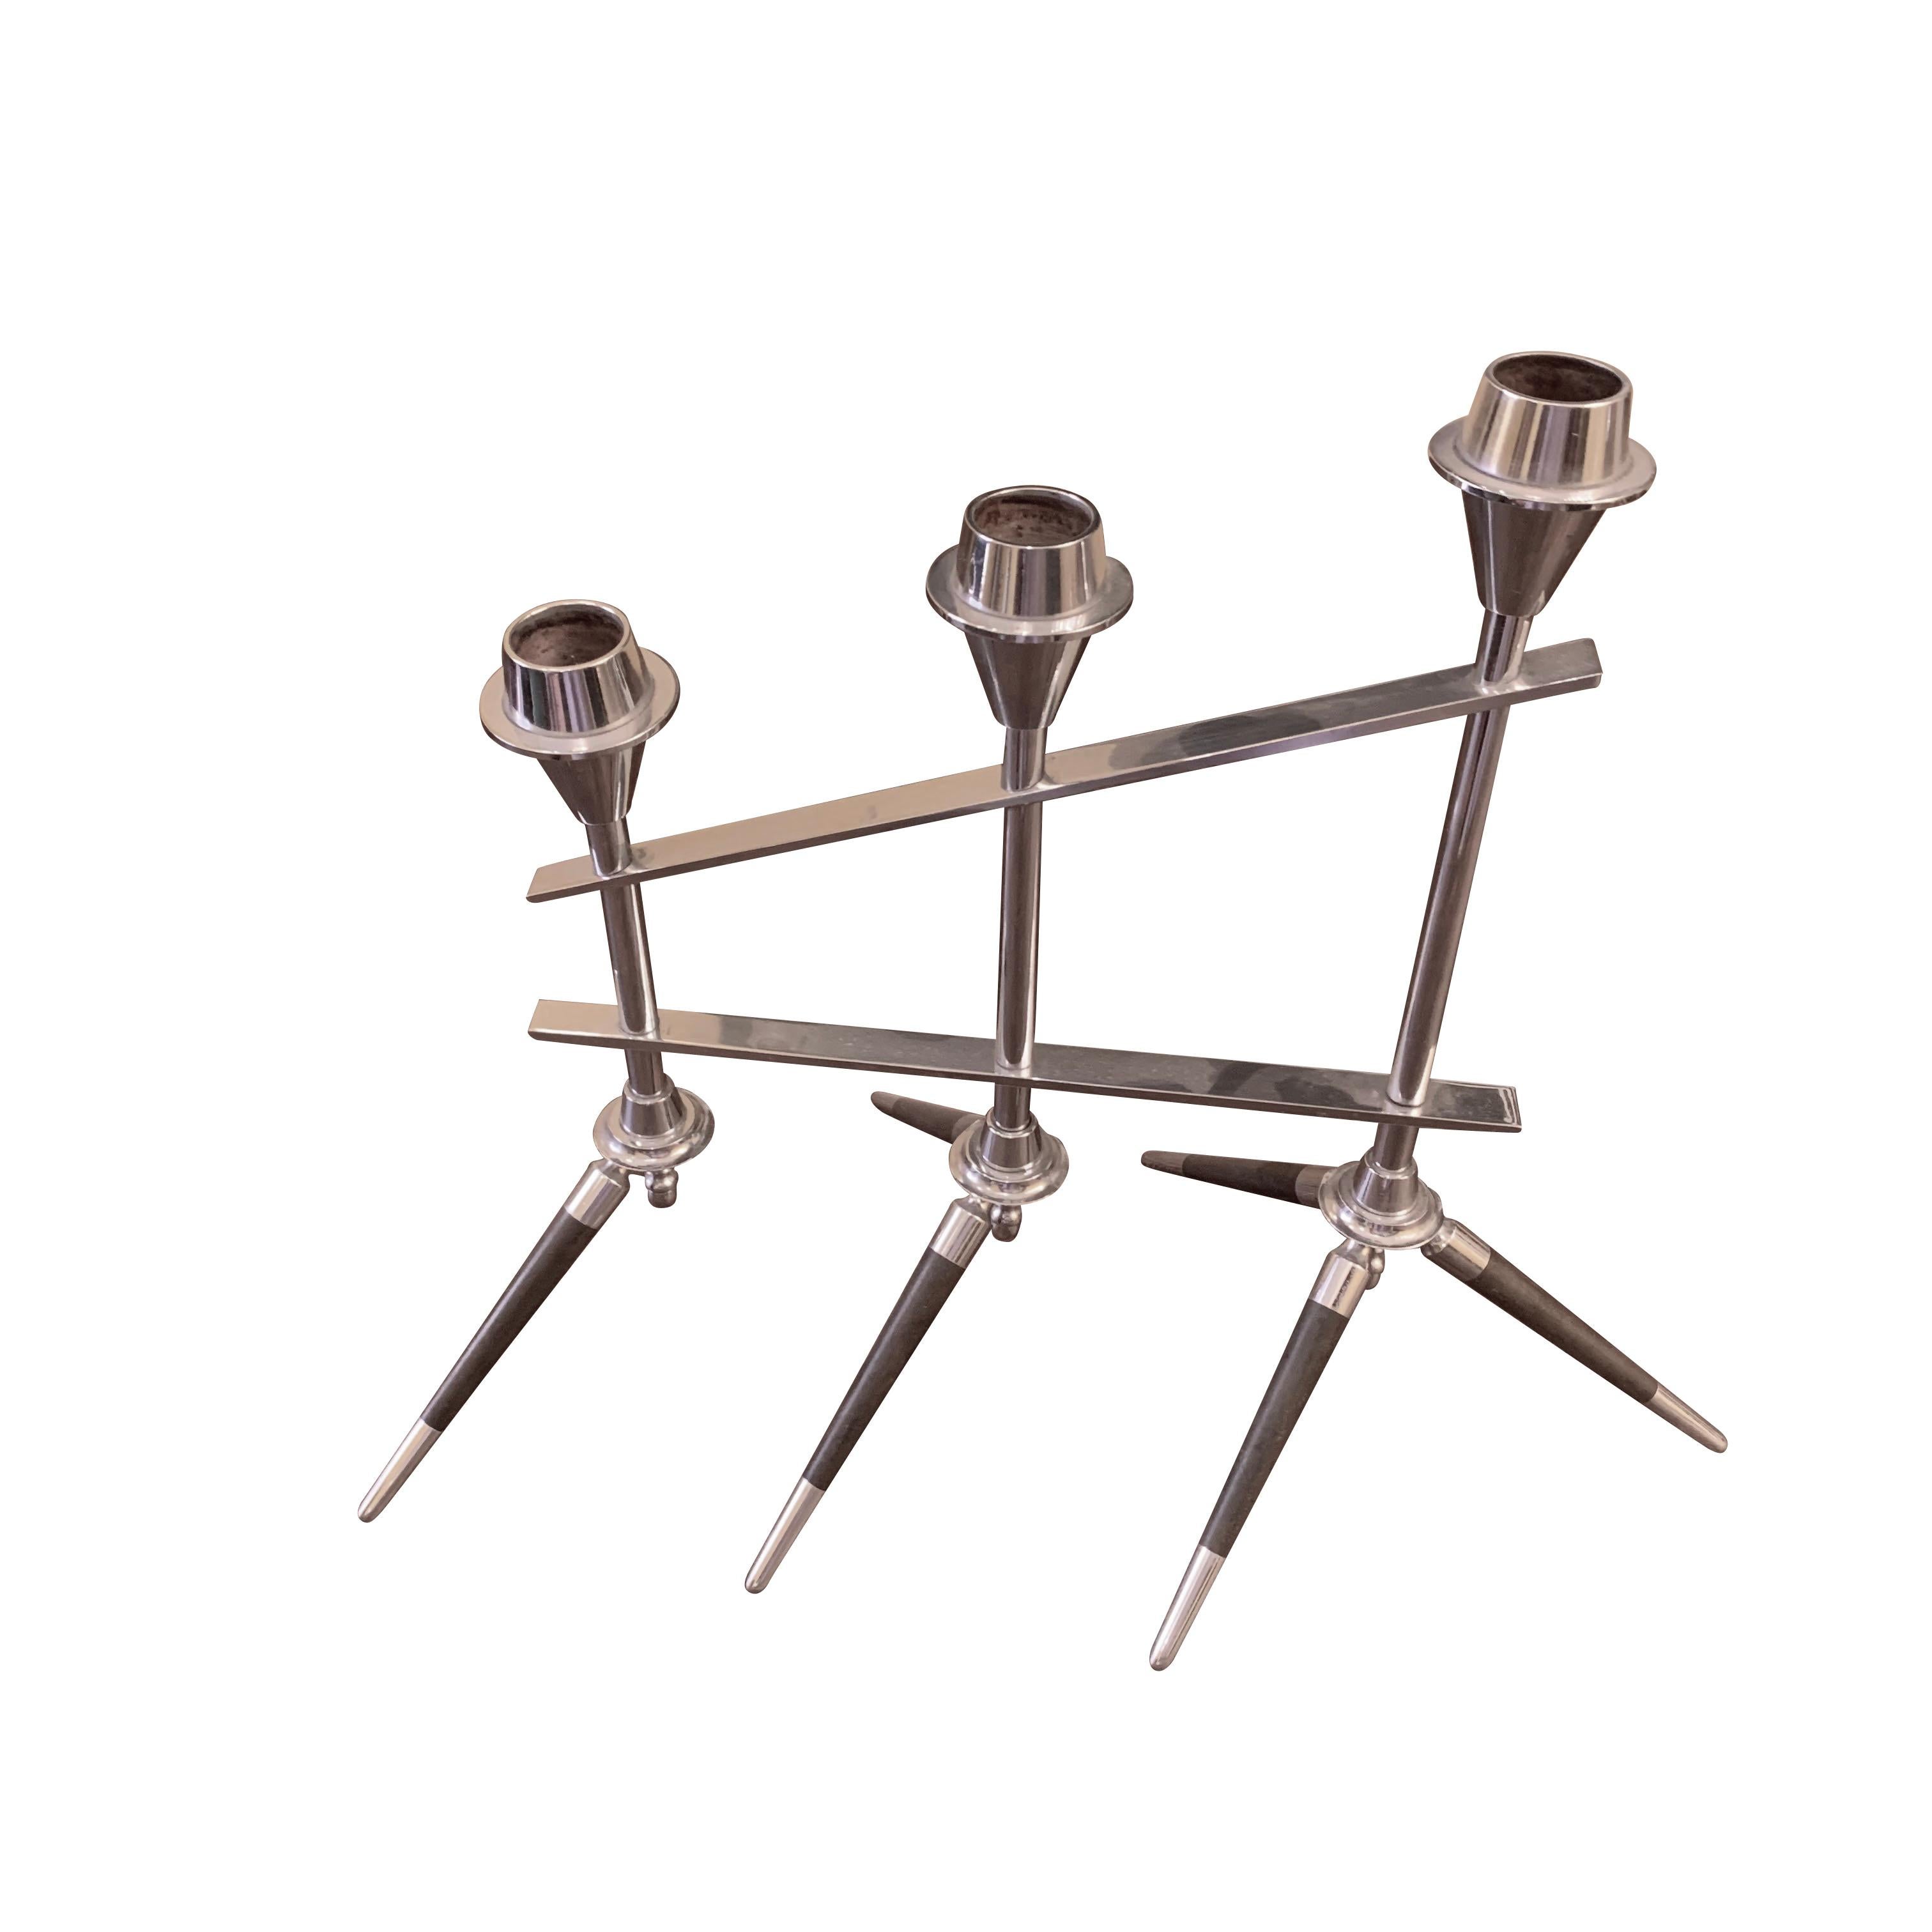 Midcentury French pair of chrome candlesticks with ebonized wood trim
Holds a total of six candles
Size of each candlestick is 14